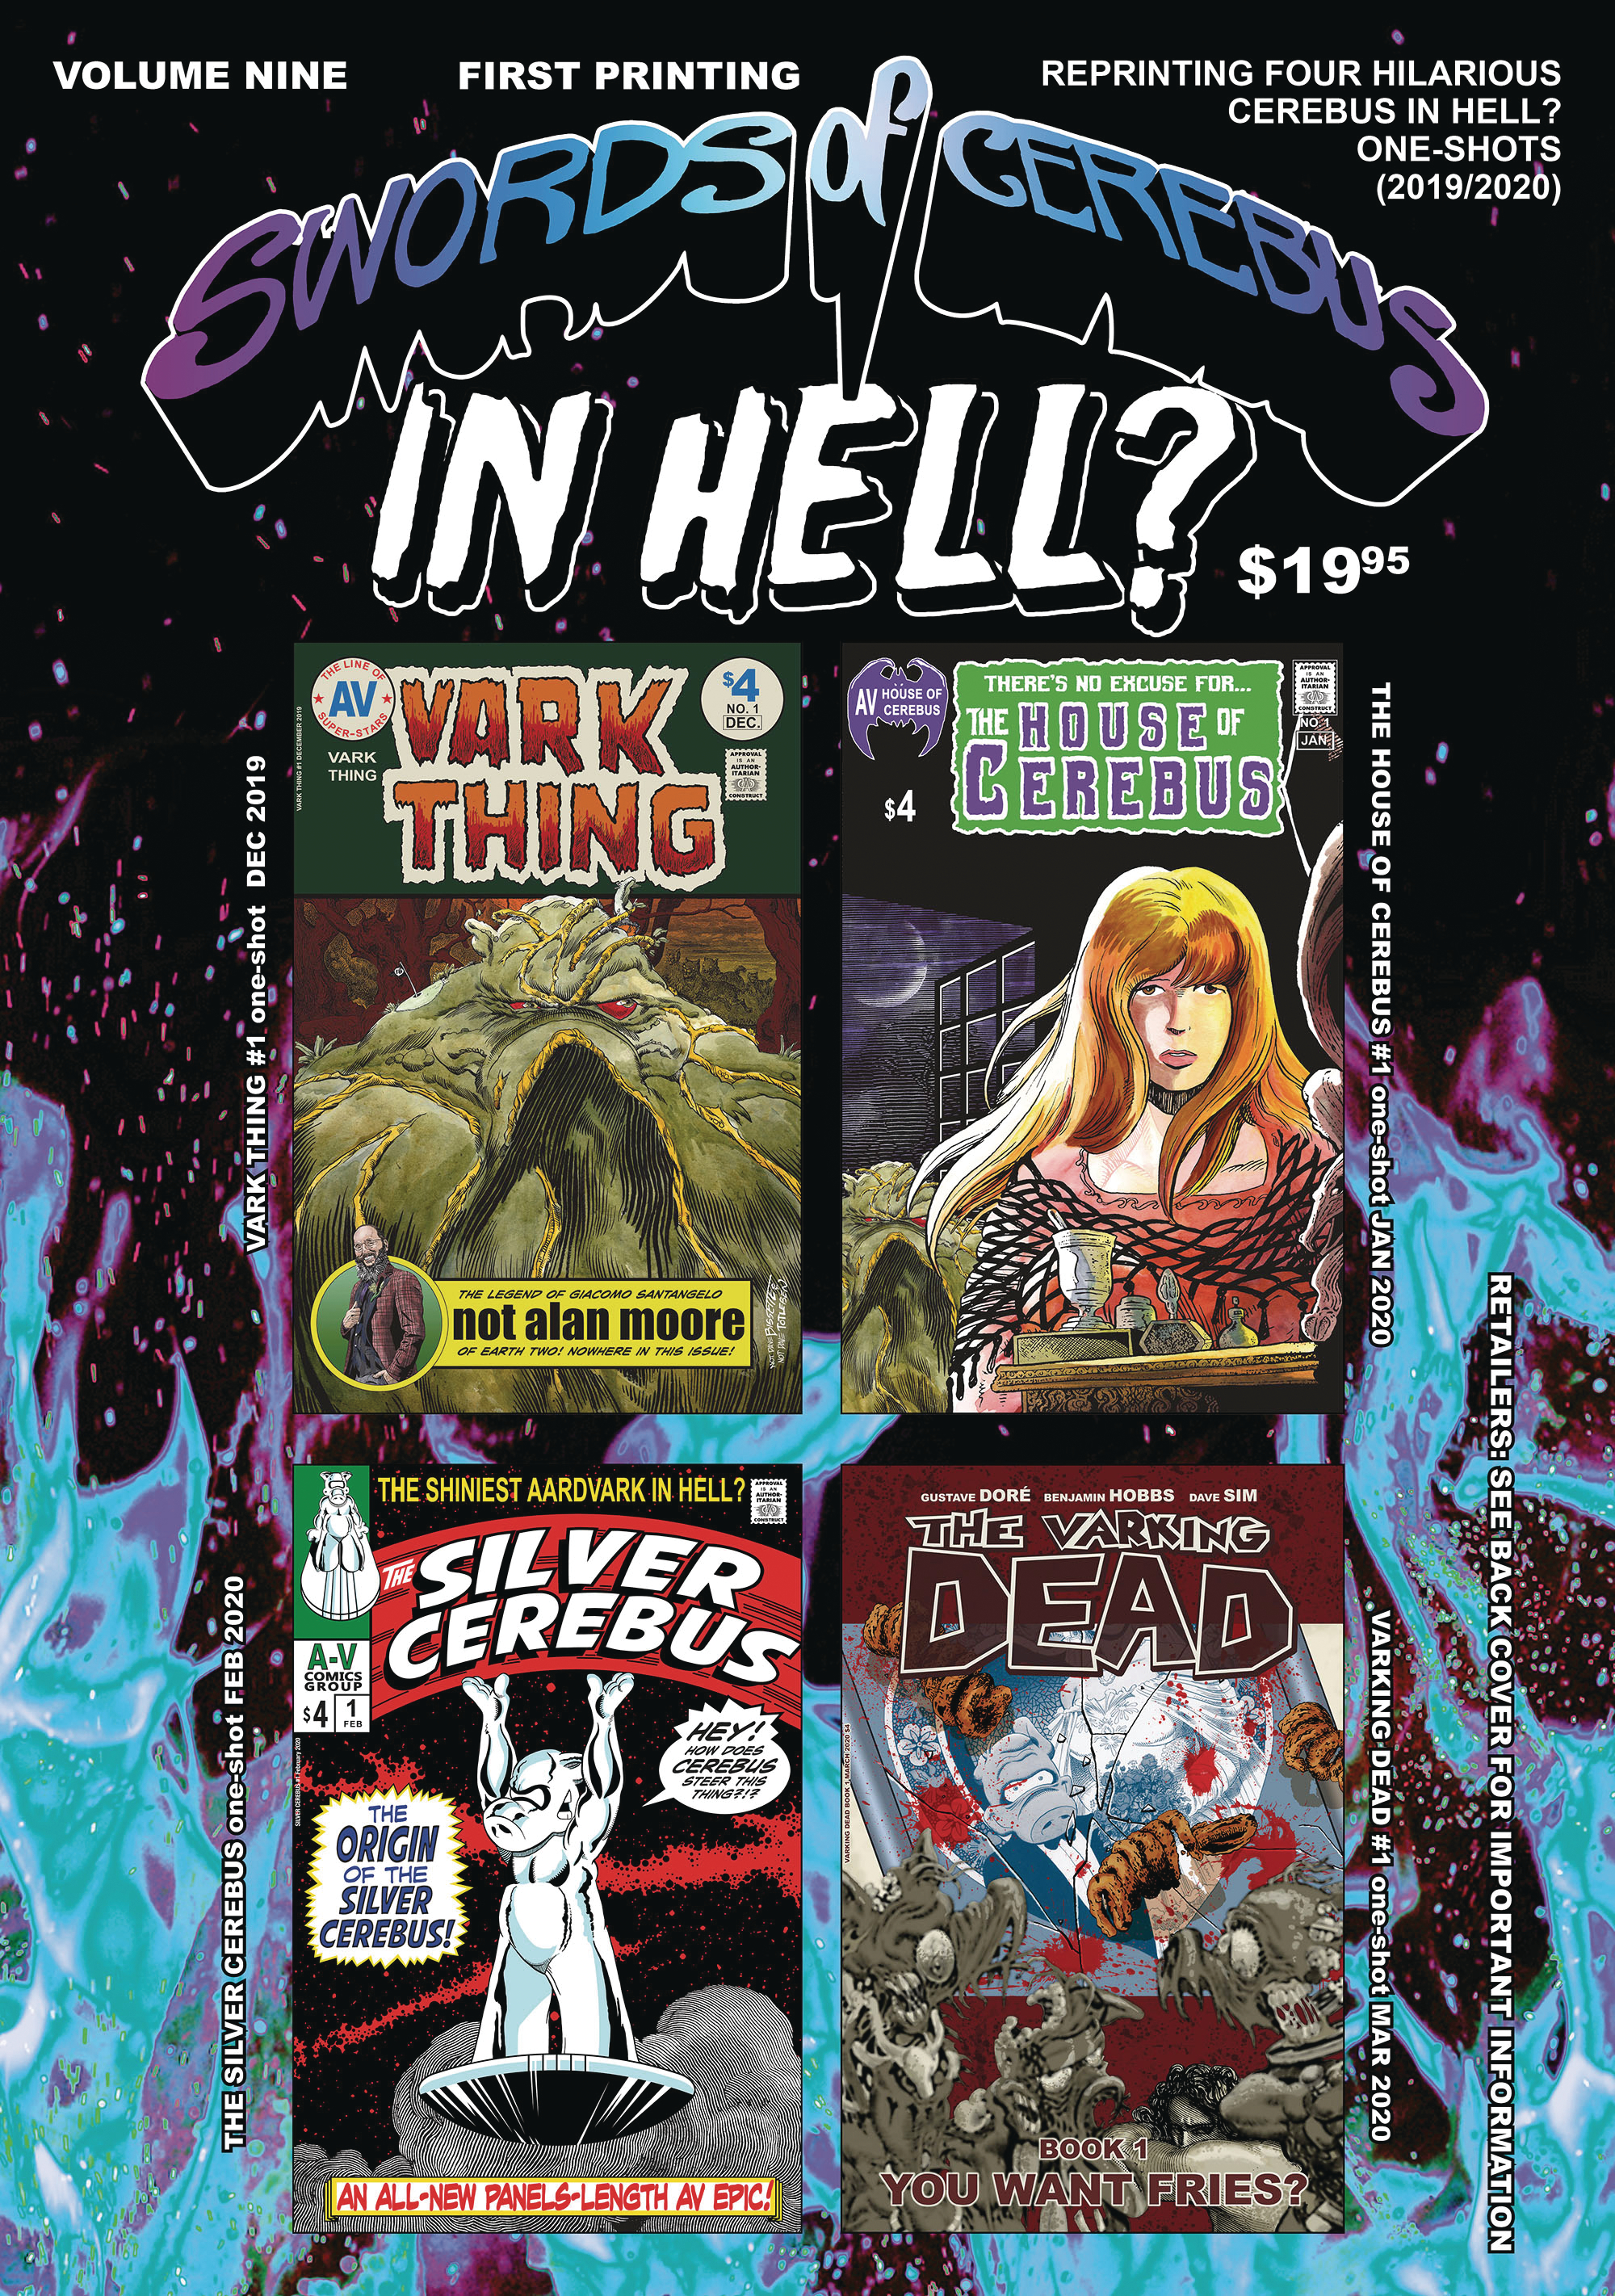 Swords of Cerebus In Hell Graphic Novel Volume 9